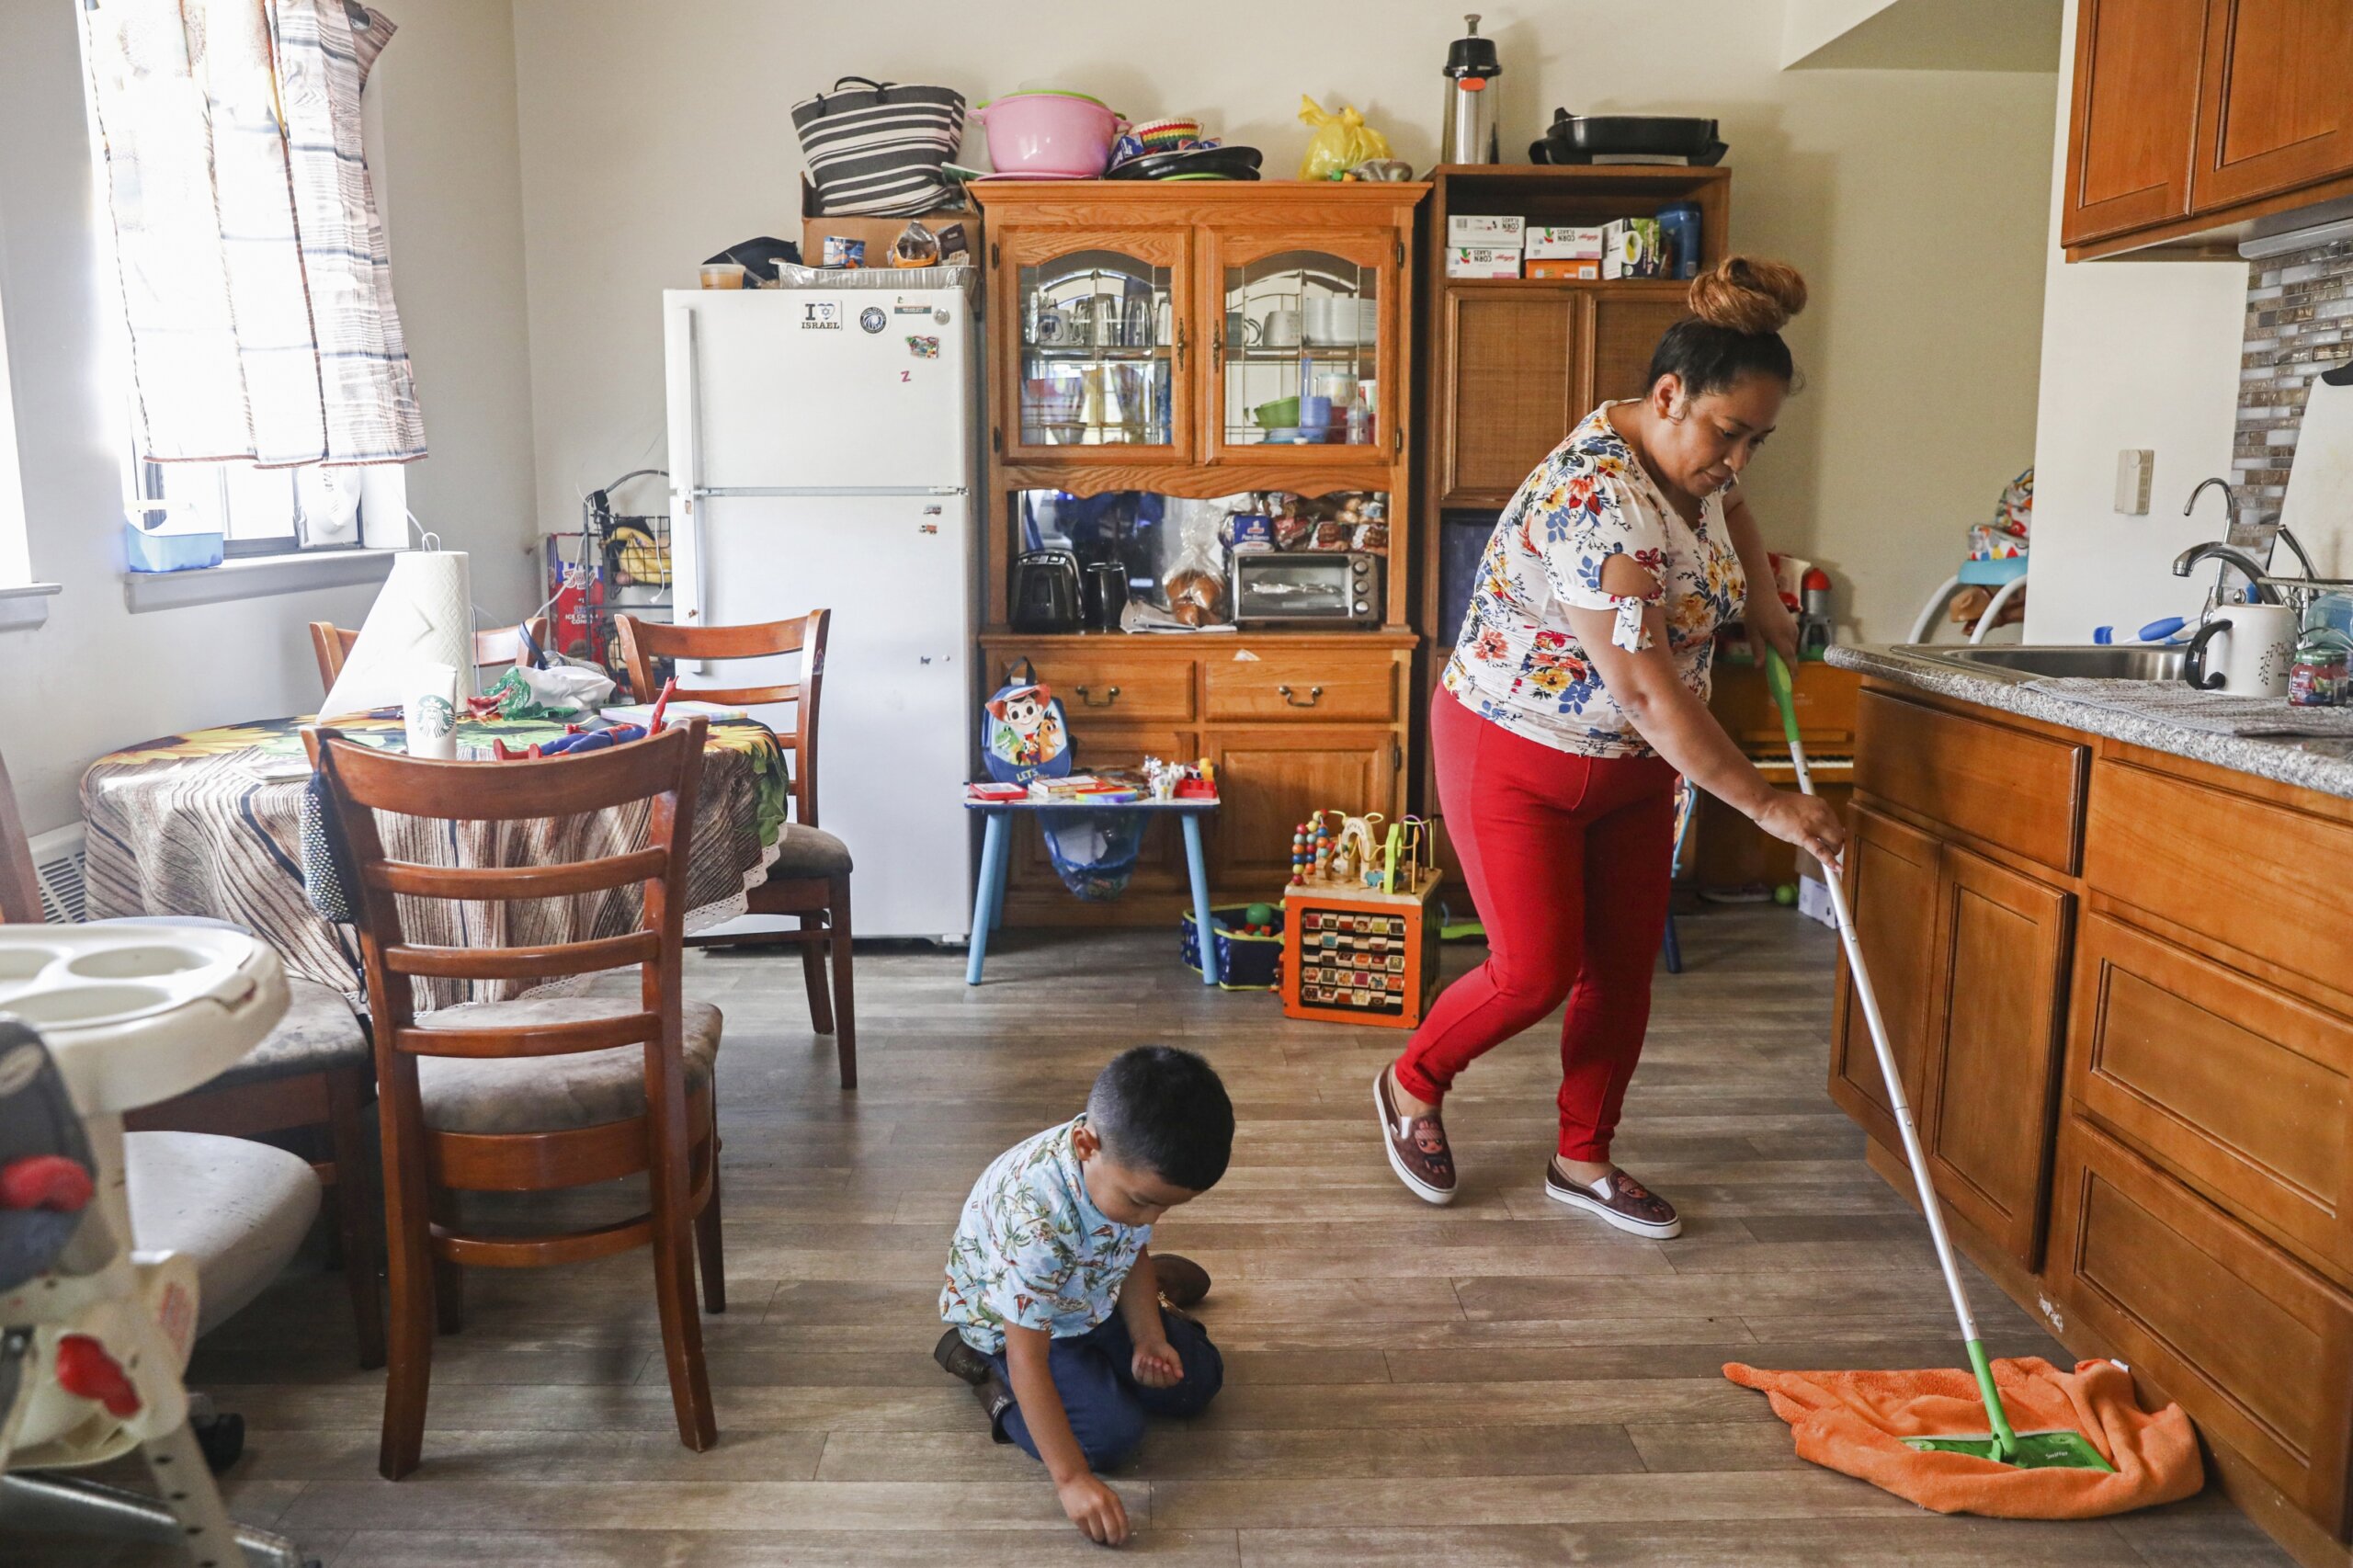 San Francisco to require sick leave for nannies, gardeners WTOP News